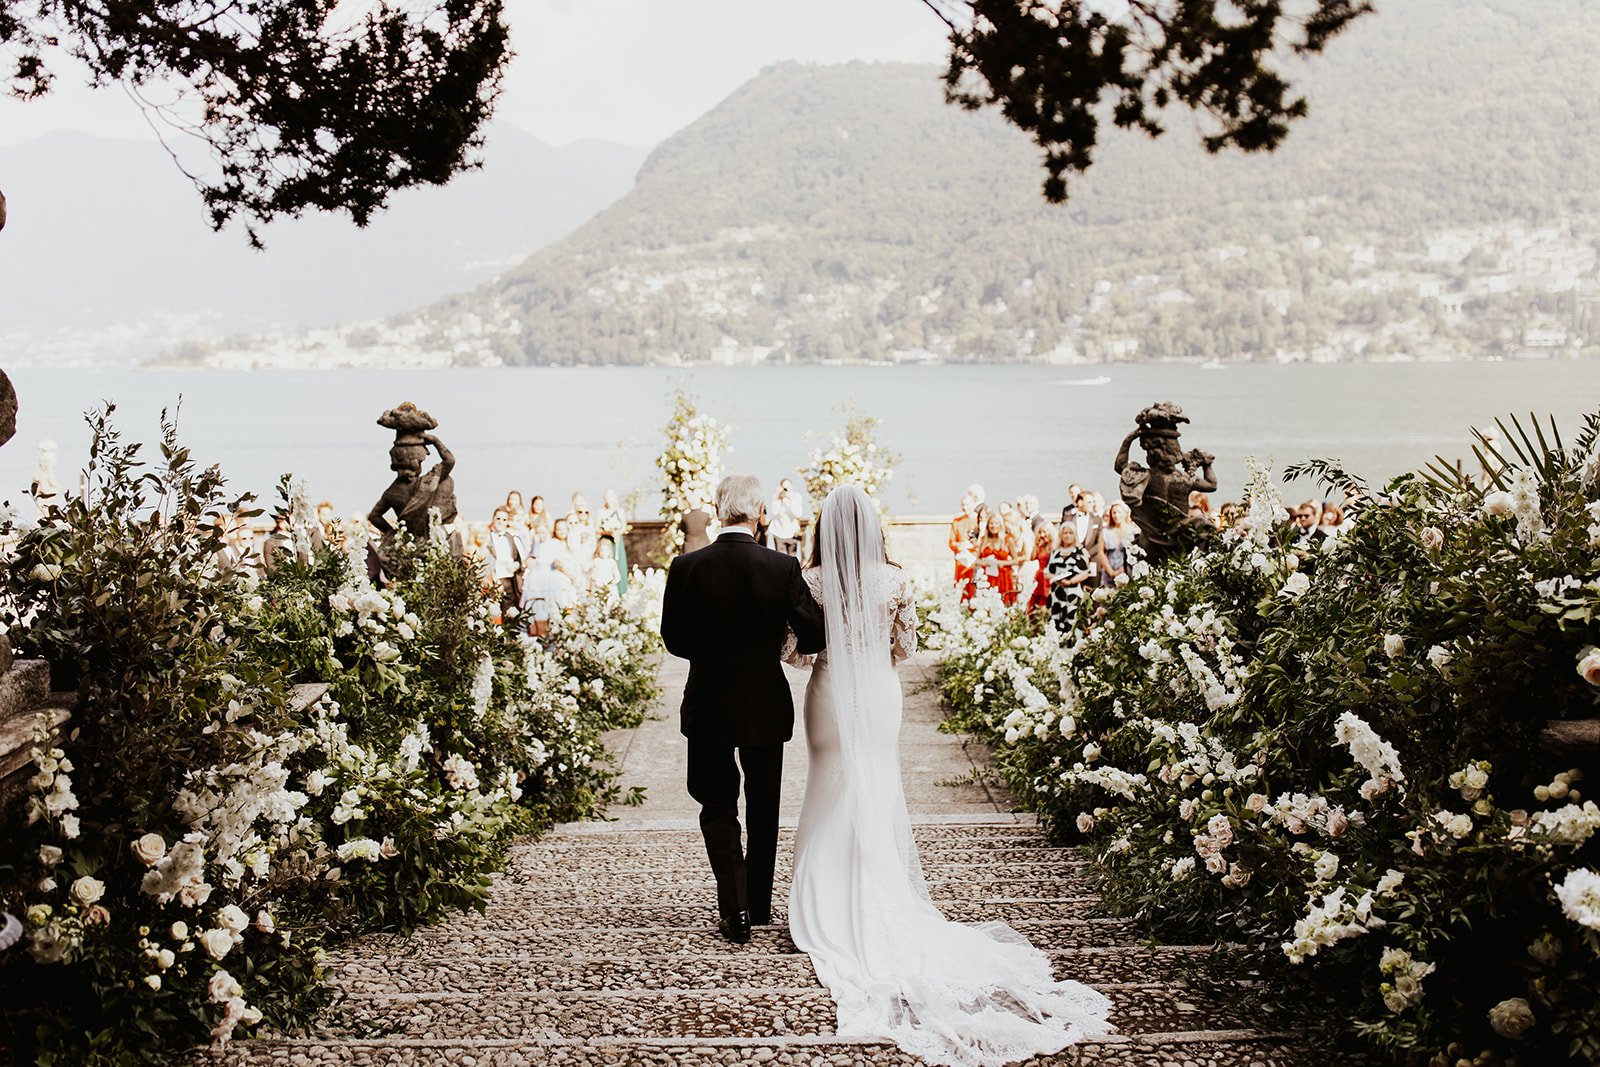 How much do wedding flowers cost in Italy? — La Lista